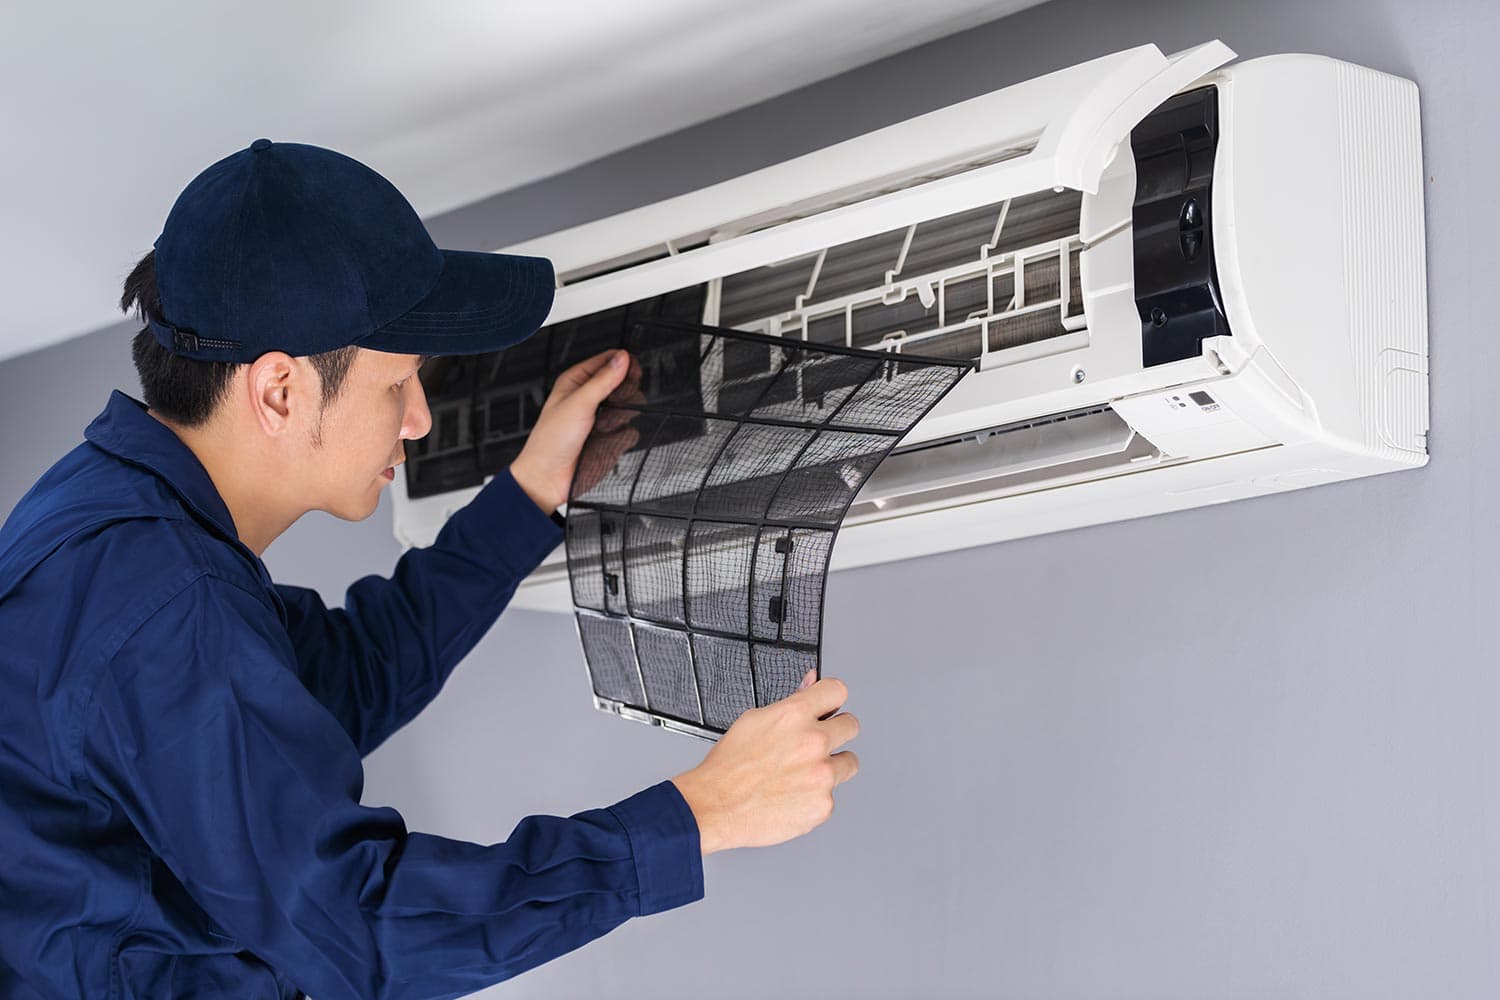 Technician service removing air filter of the air conditioner for cleaning